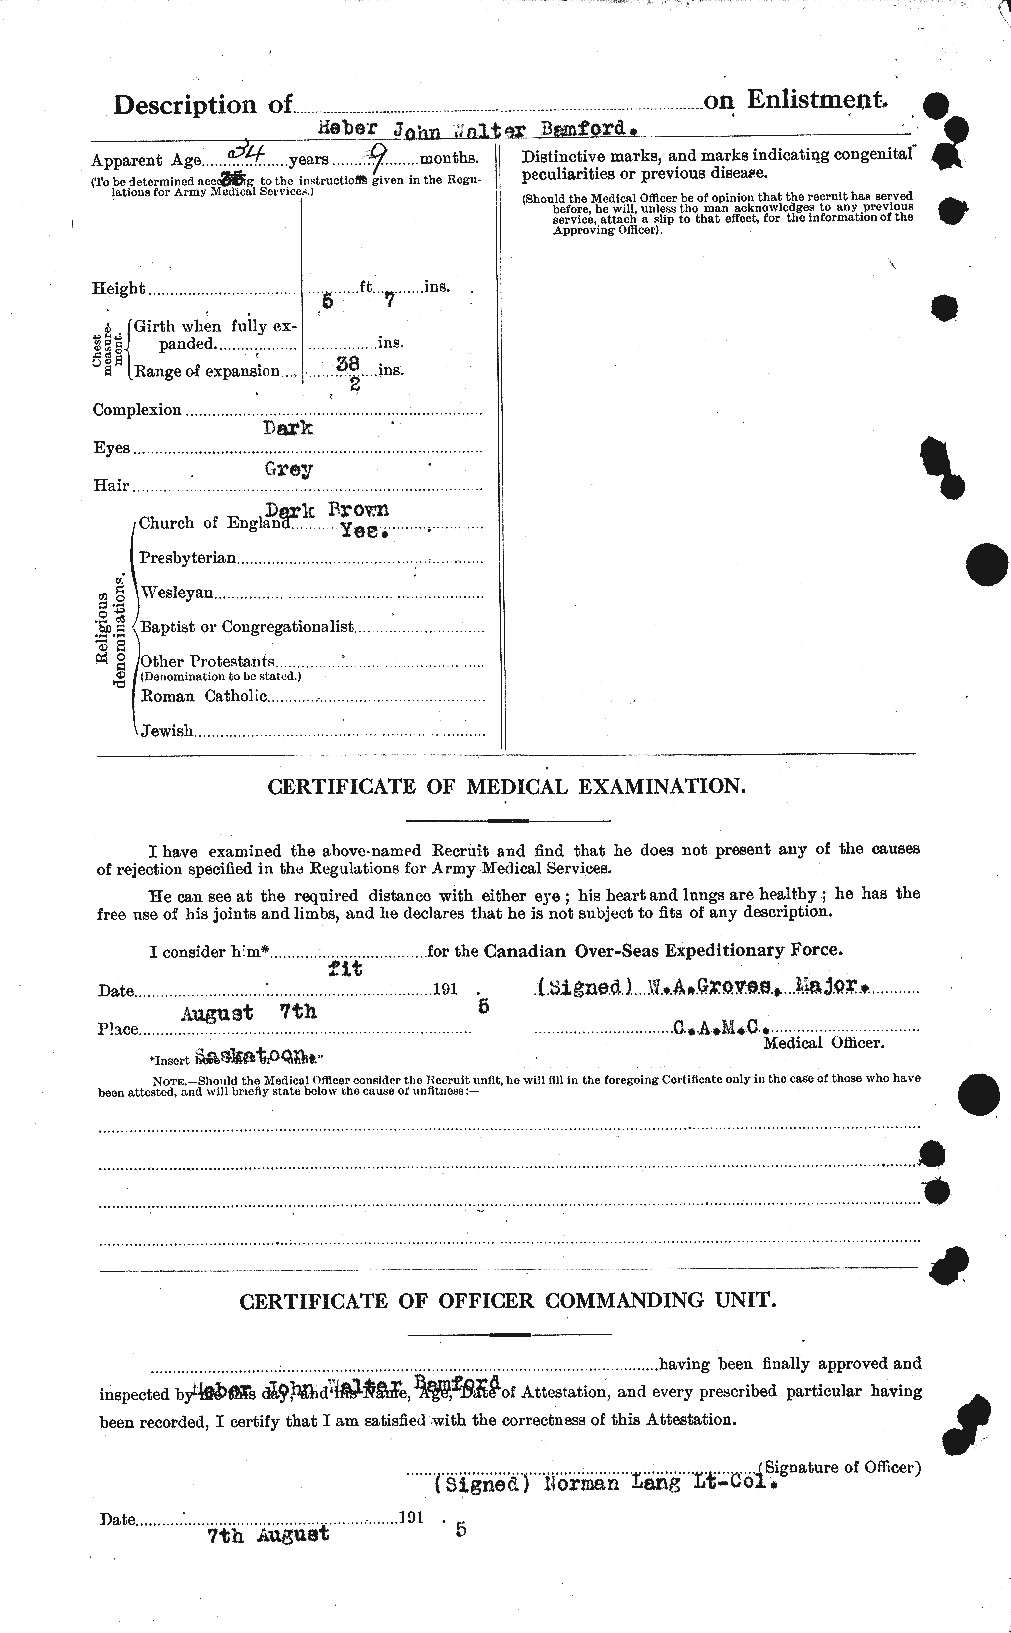 Personnel Records of the First World War - CEF 219476b